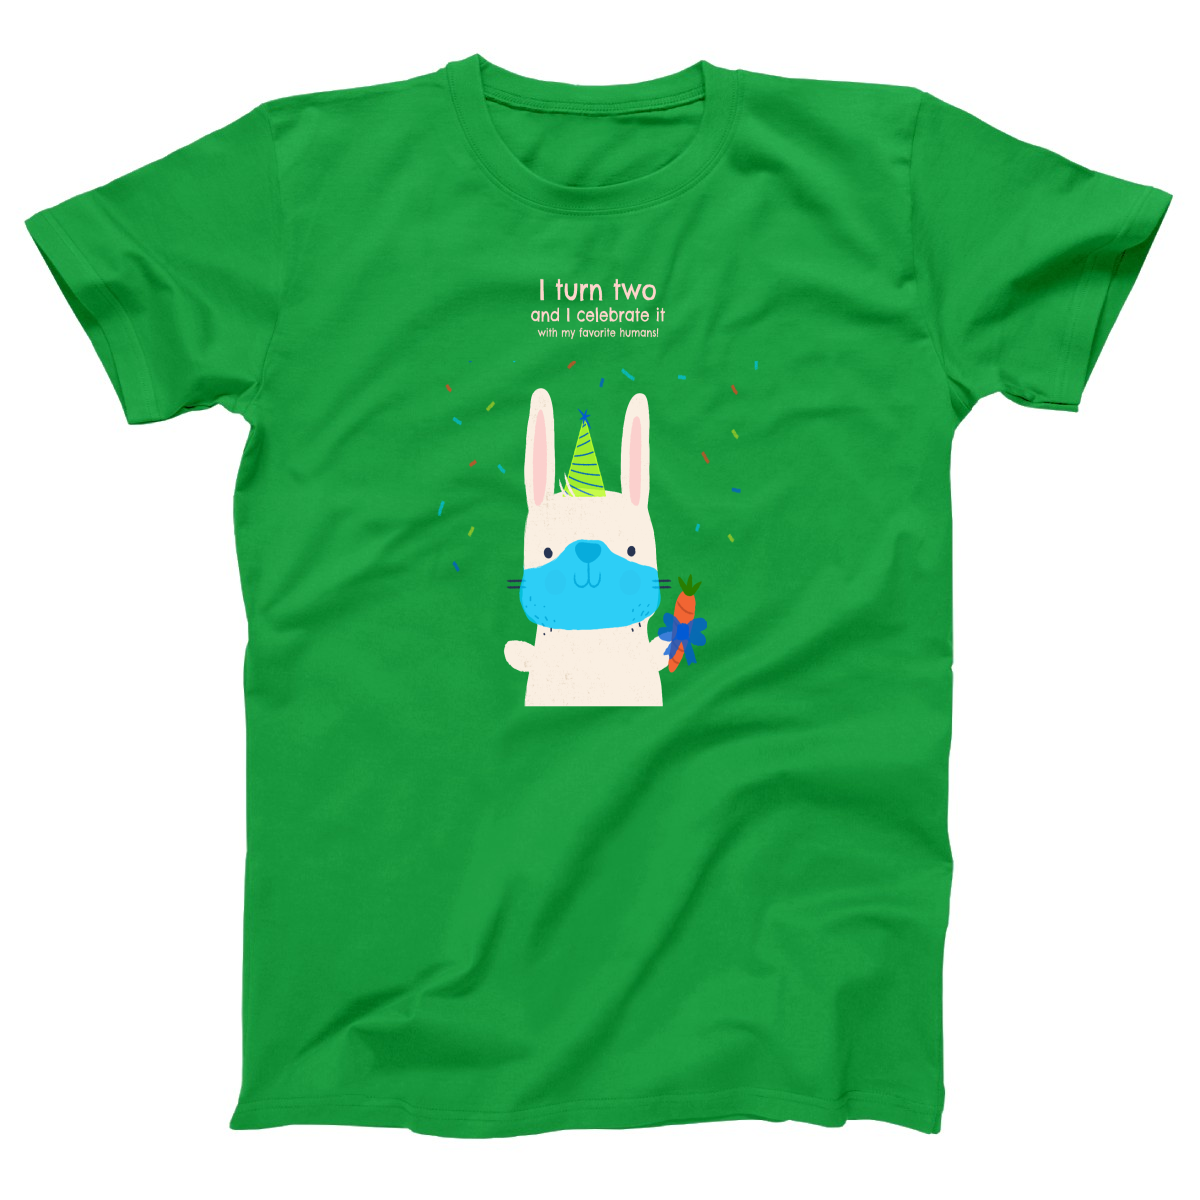 I turn two and I celebrate it with my favorite humans  Women's T-shirt | Green